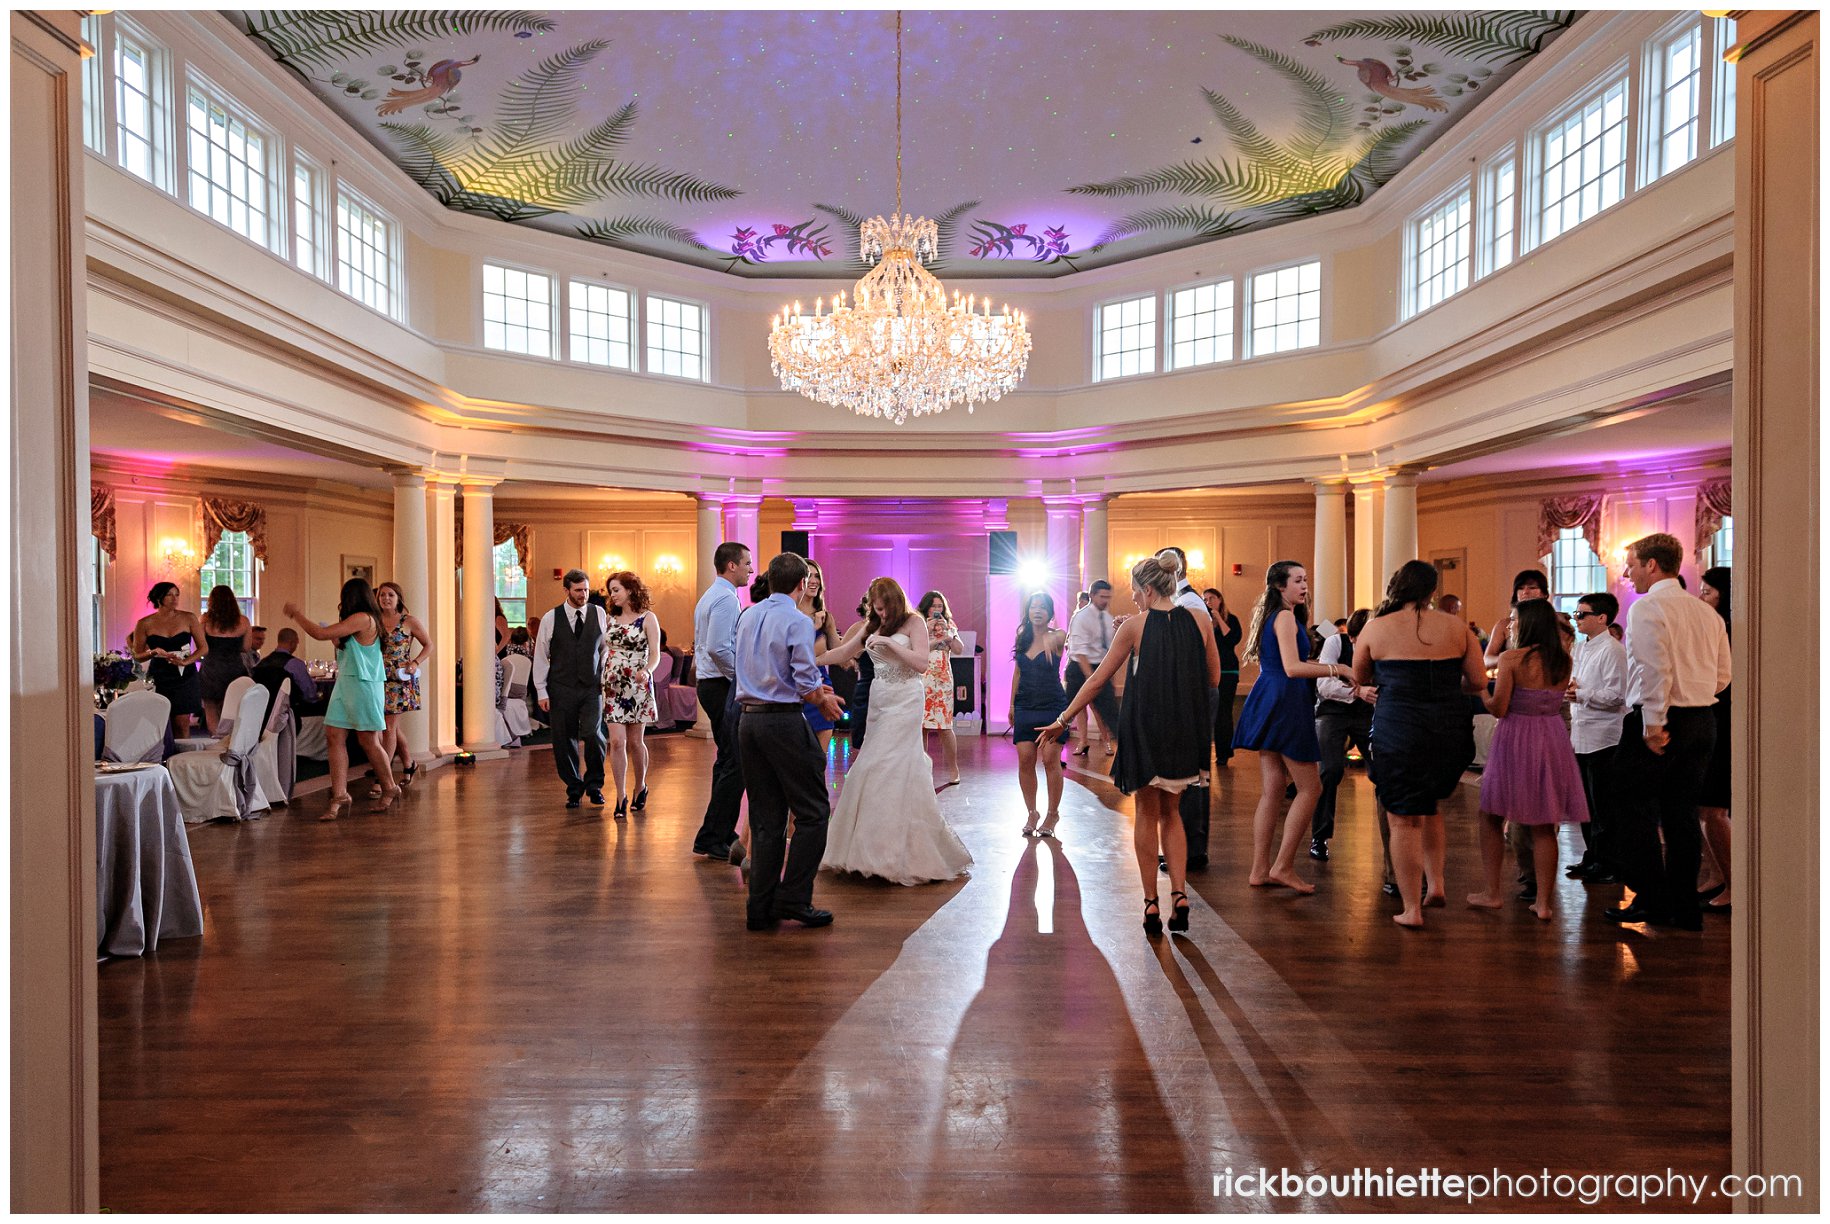 dancing in the Crystal Ballroom at Mountain View Grand Resort